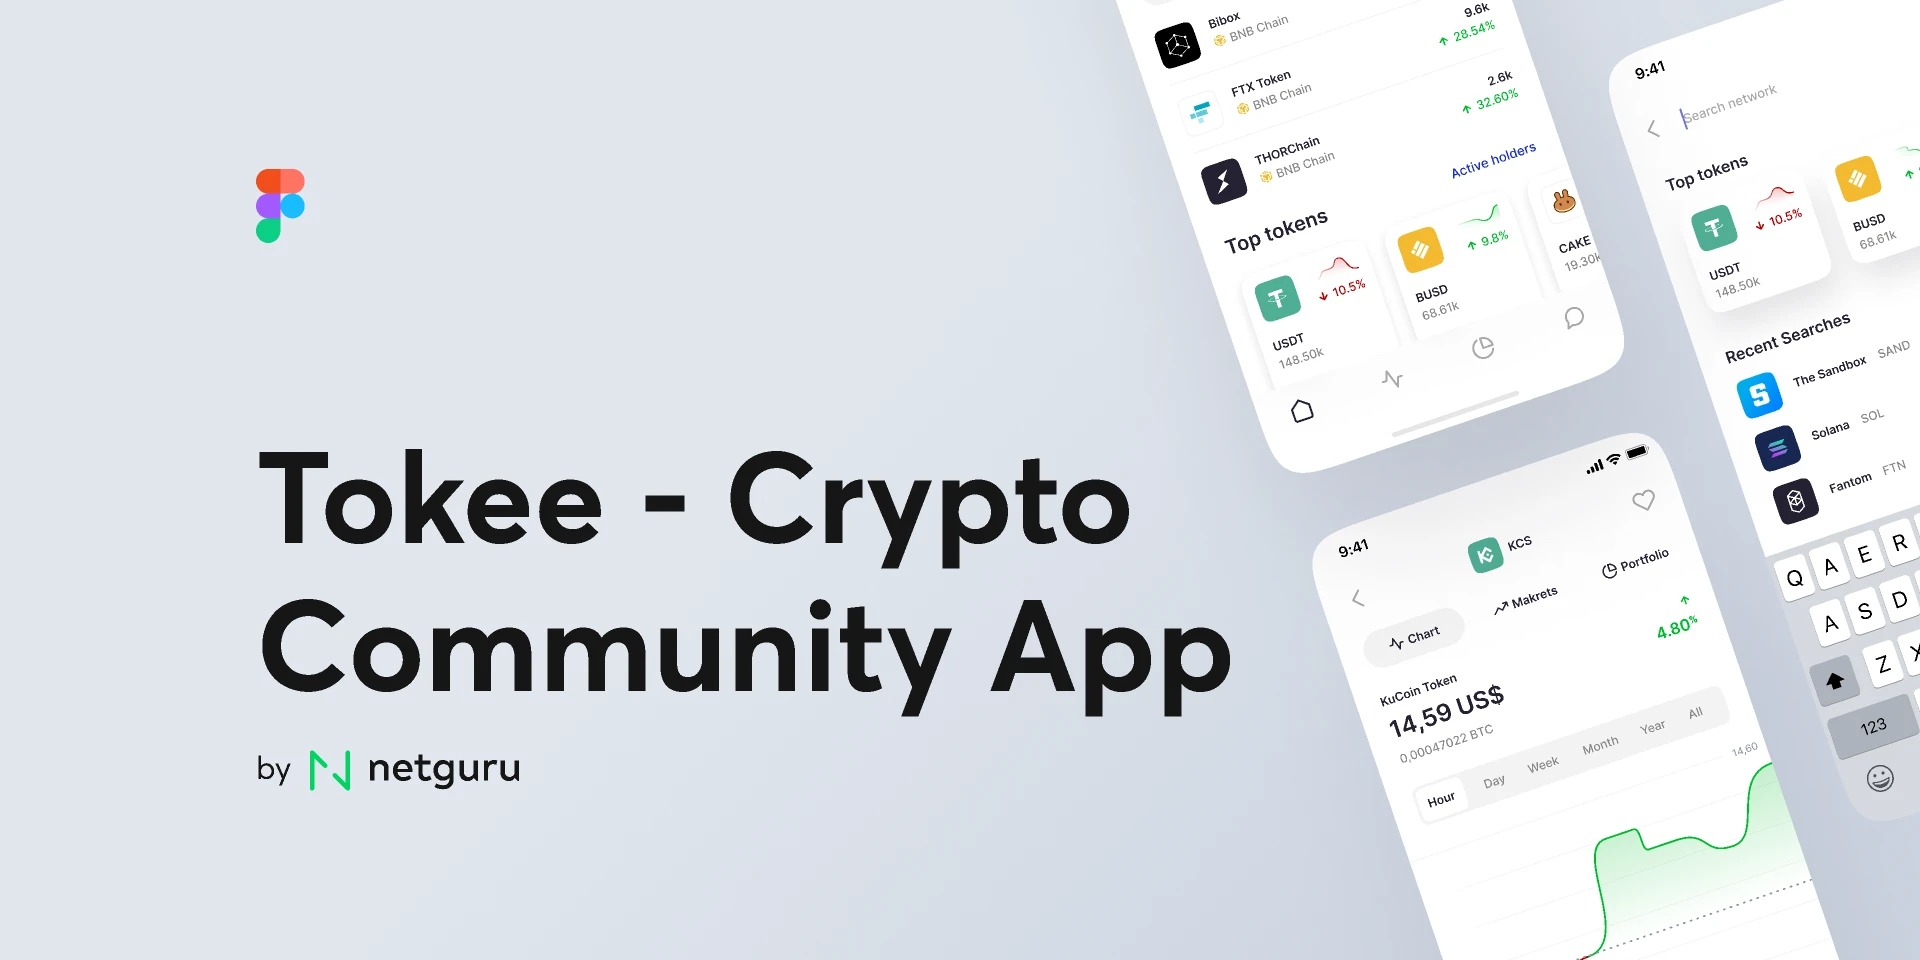 Tokee - Crypto Community App for Figma and Adobe XD